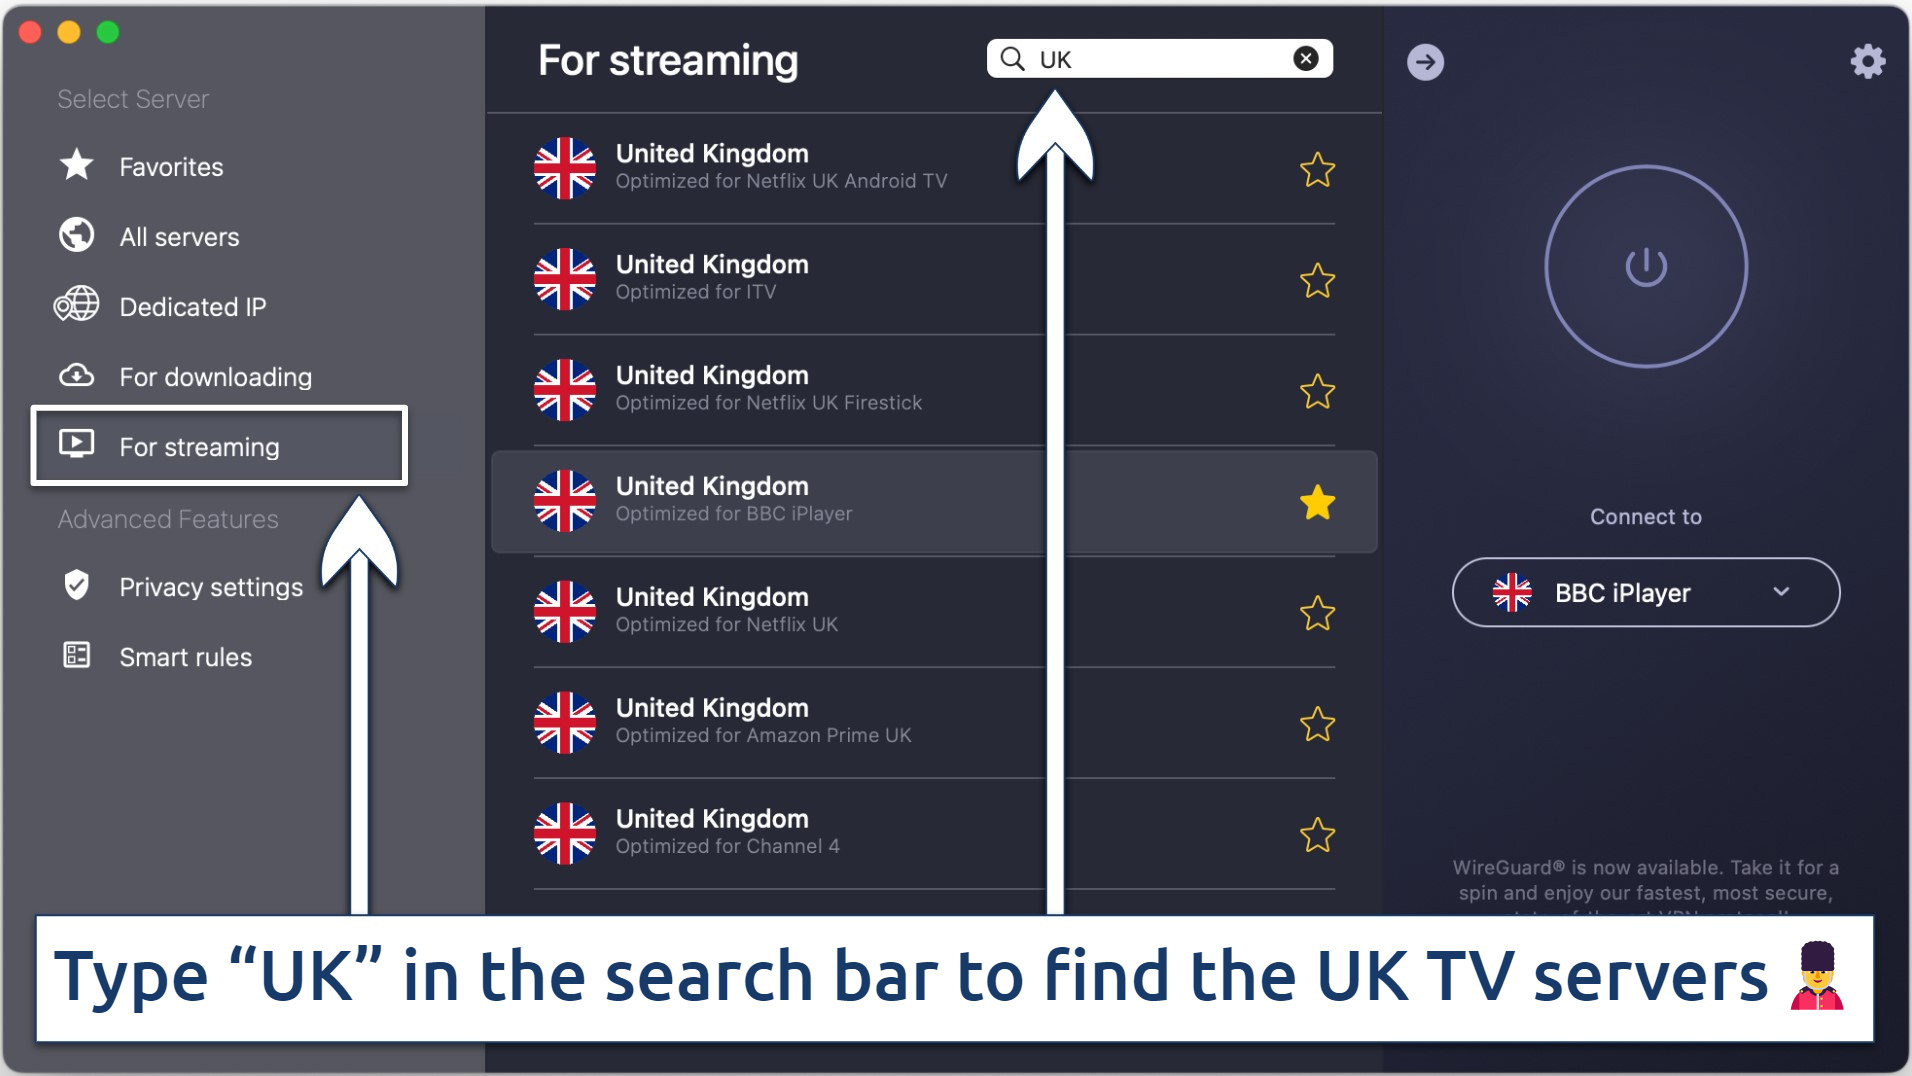 Screenshot of the specialty UK TV servers on CyberGhost's app